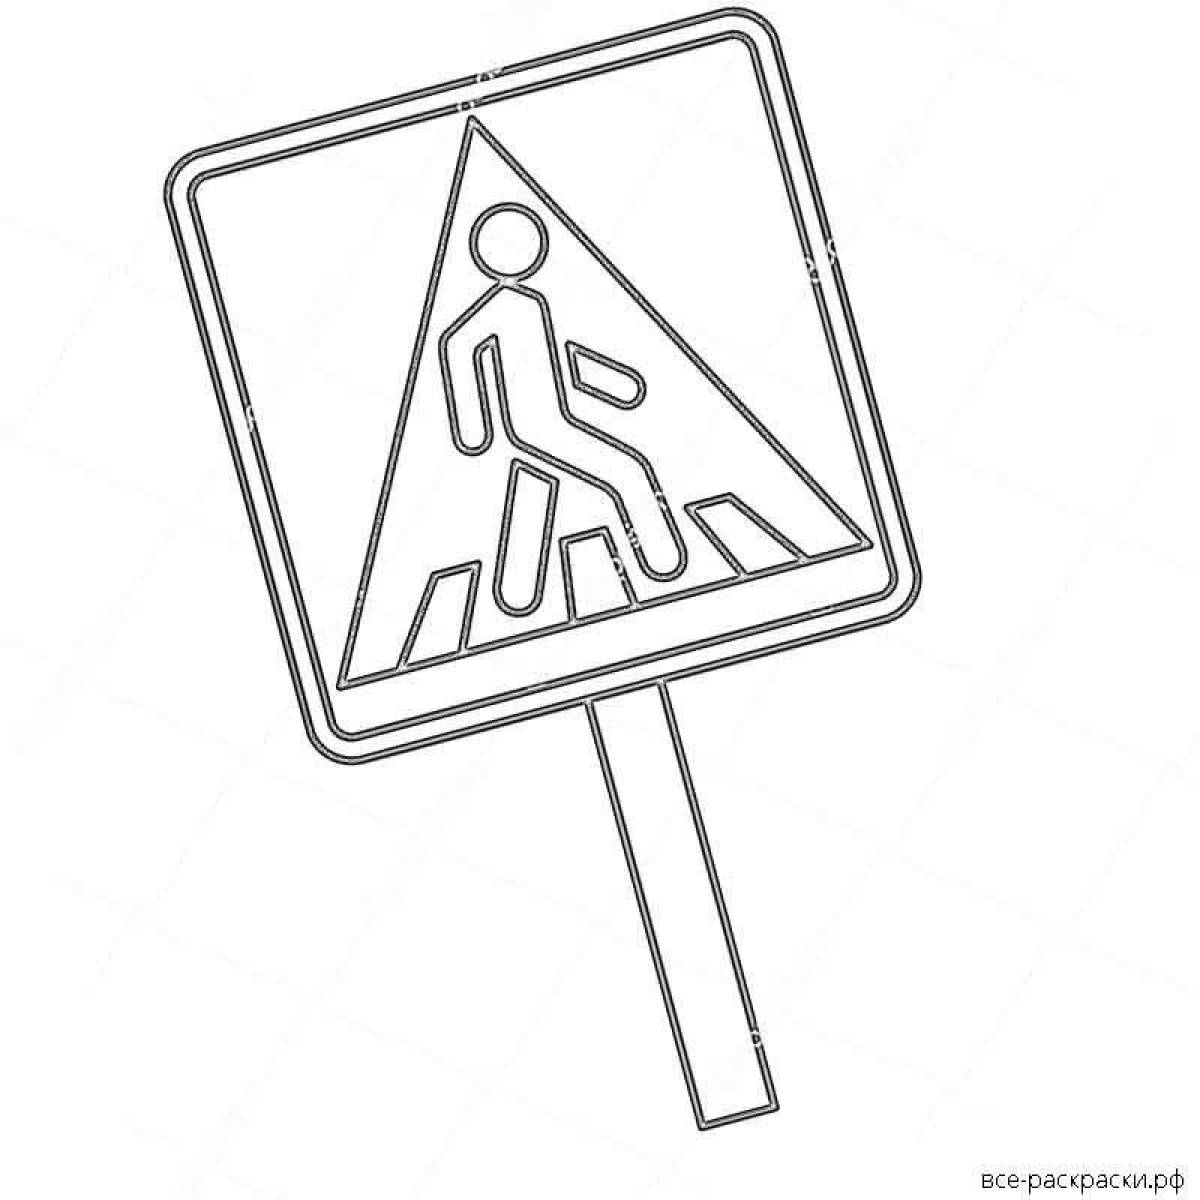 Coloring page for an attractive crosswalk sign